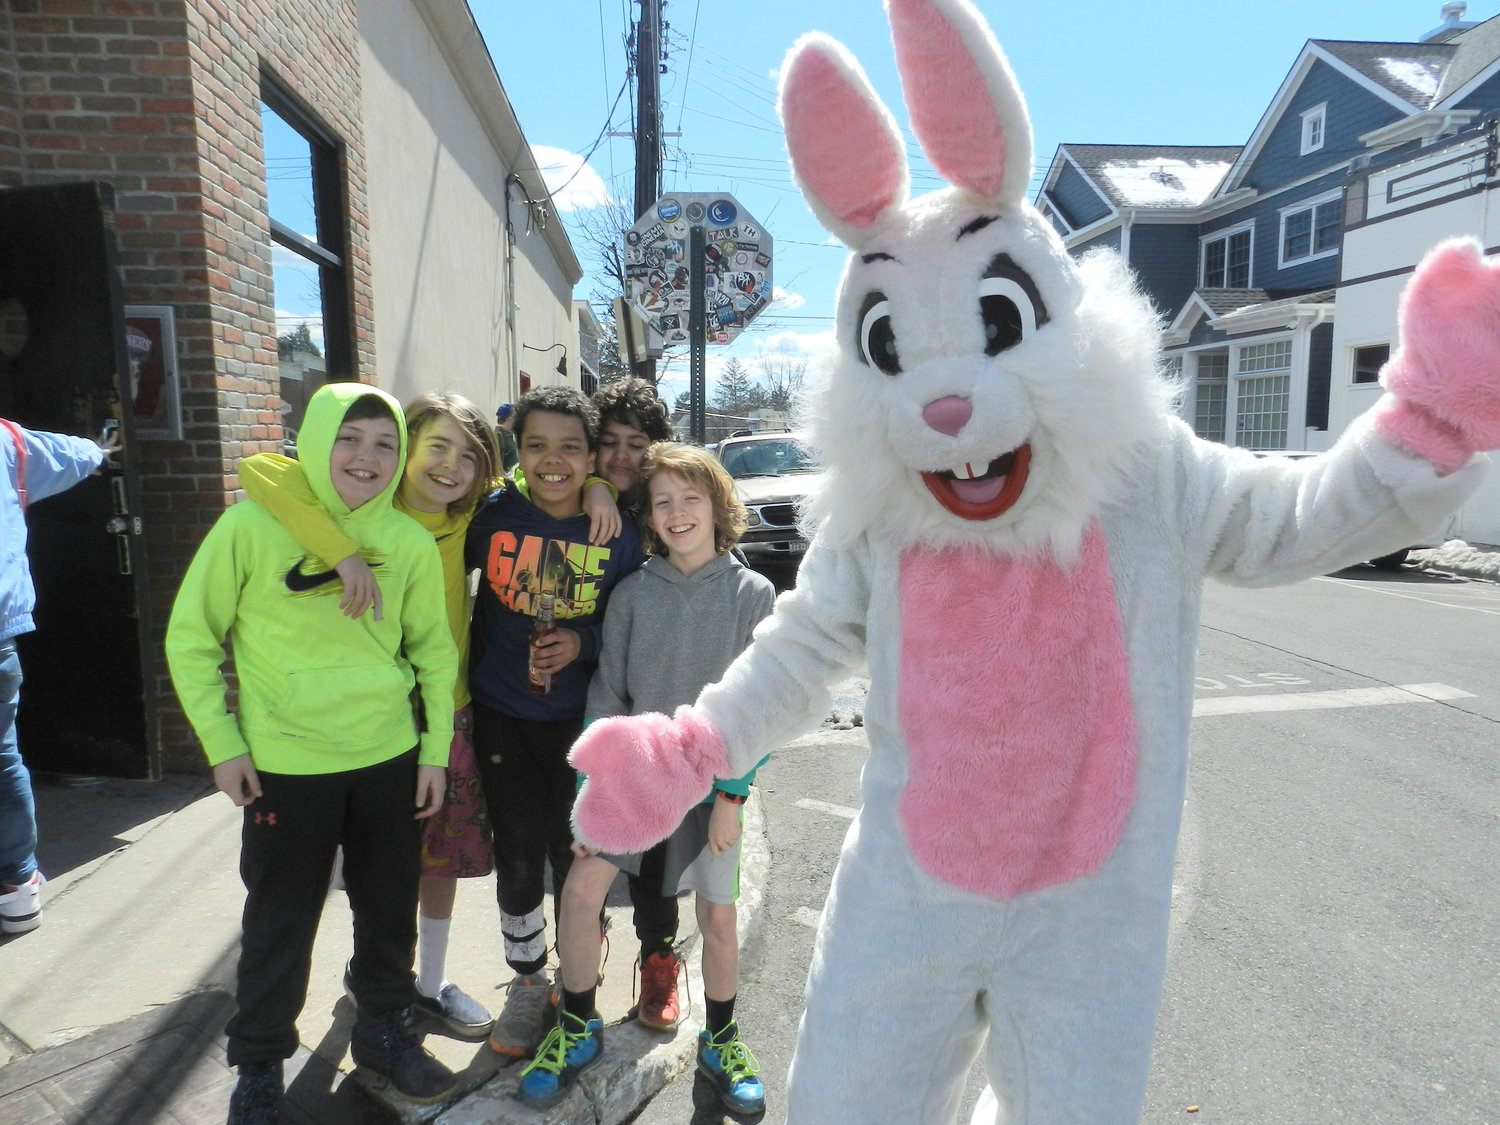 The Easter Bunny will again make an appearance at the Long Island Rabbit Rescue Group fundraiser, like it did in 2018, with Brendan Kenny, John Haff, Sawyer Deseve, Isaac Bratter and Seamus Casey.